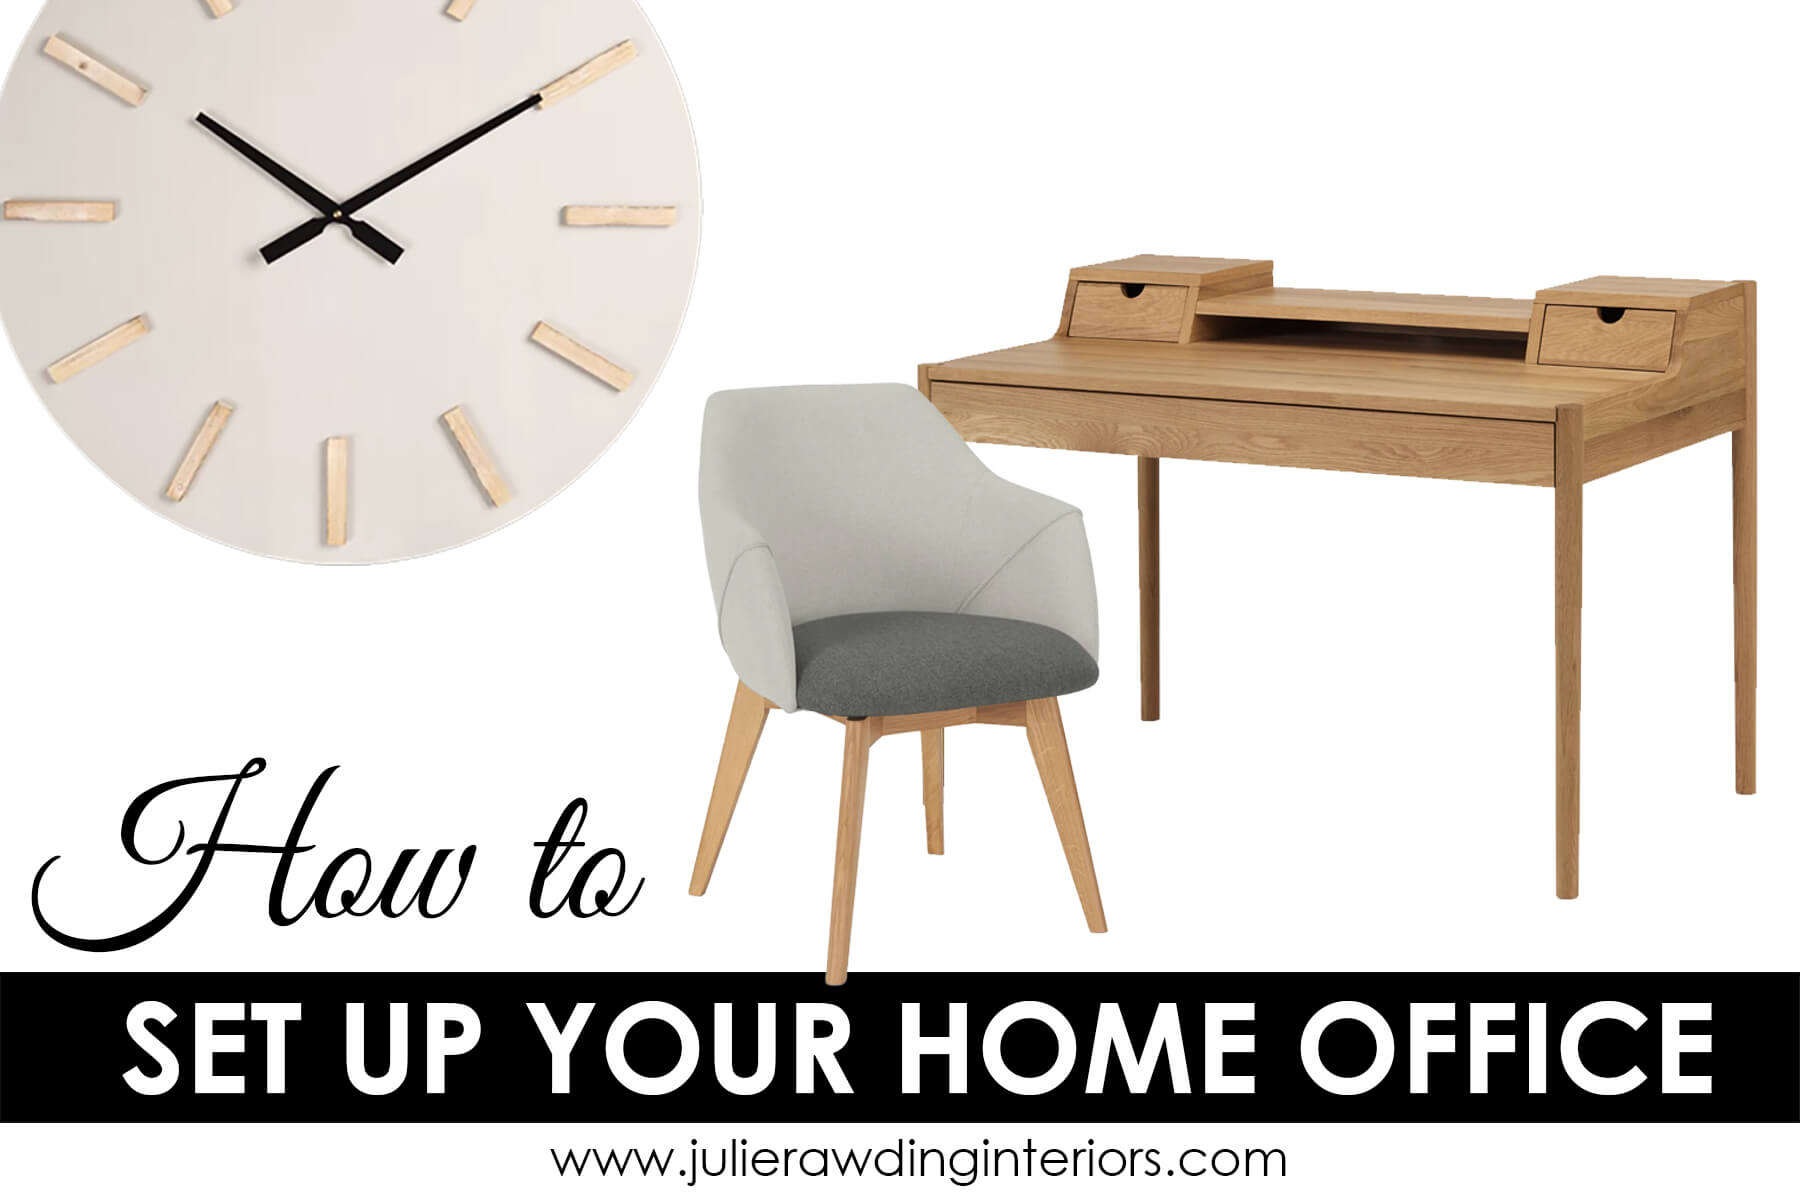 This Article Will Make Your Home Office Amazing